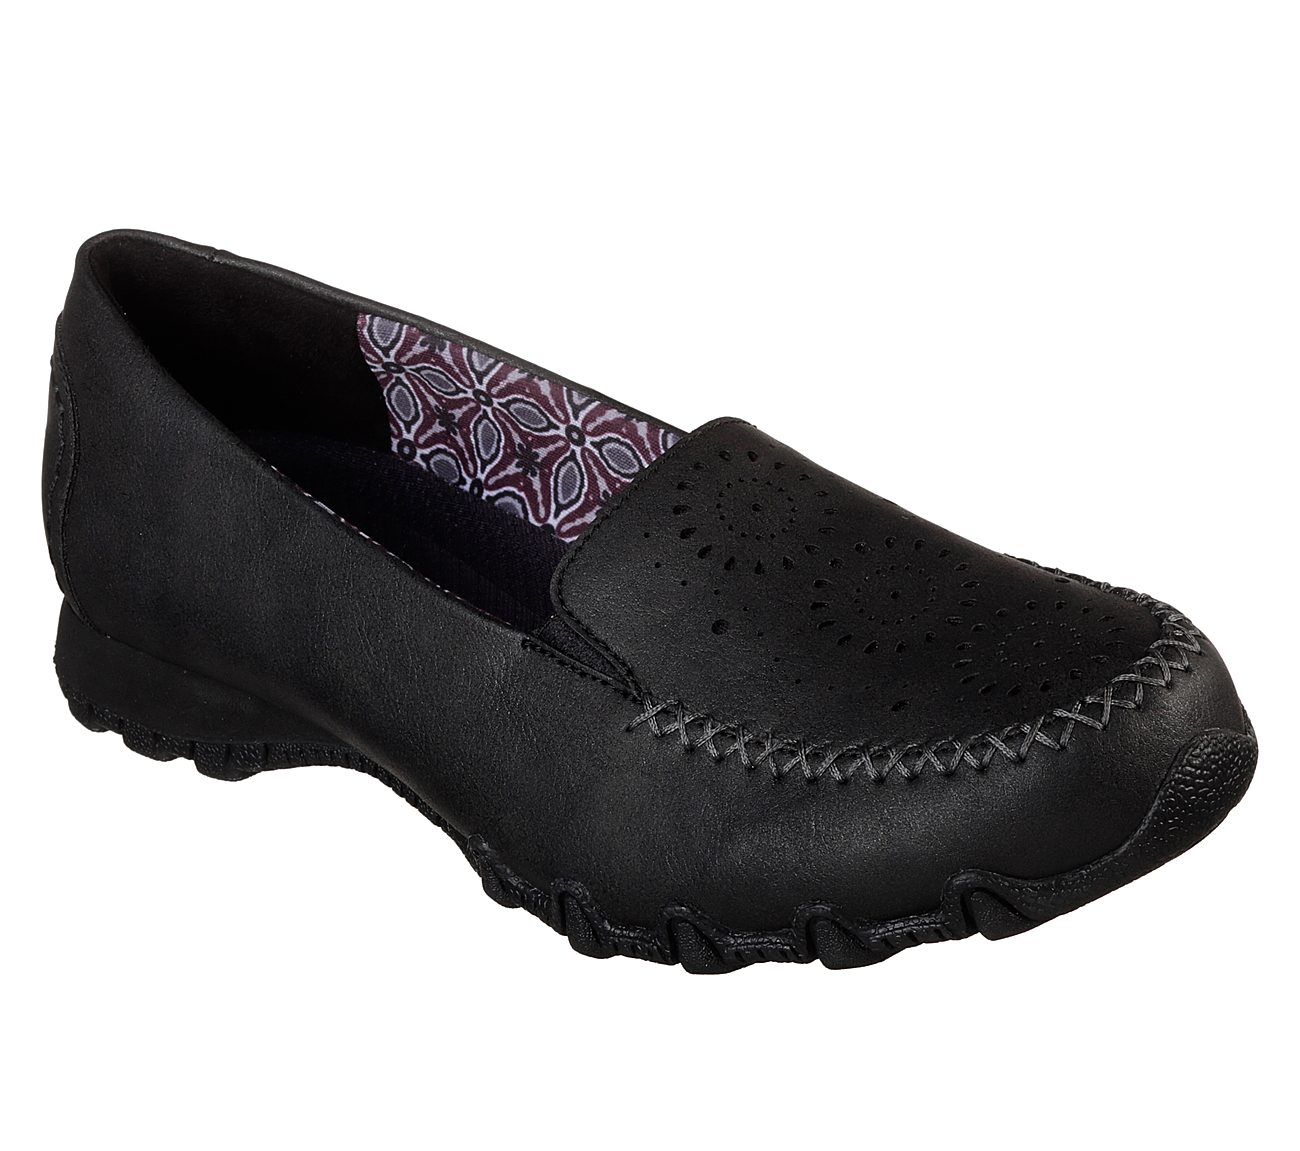 Buy Skechers Relaxed Fit Bikers Lass Comfort Shoes Shoes